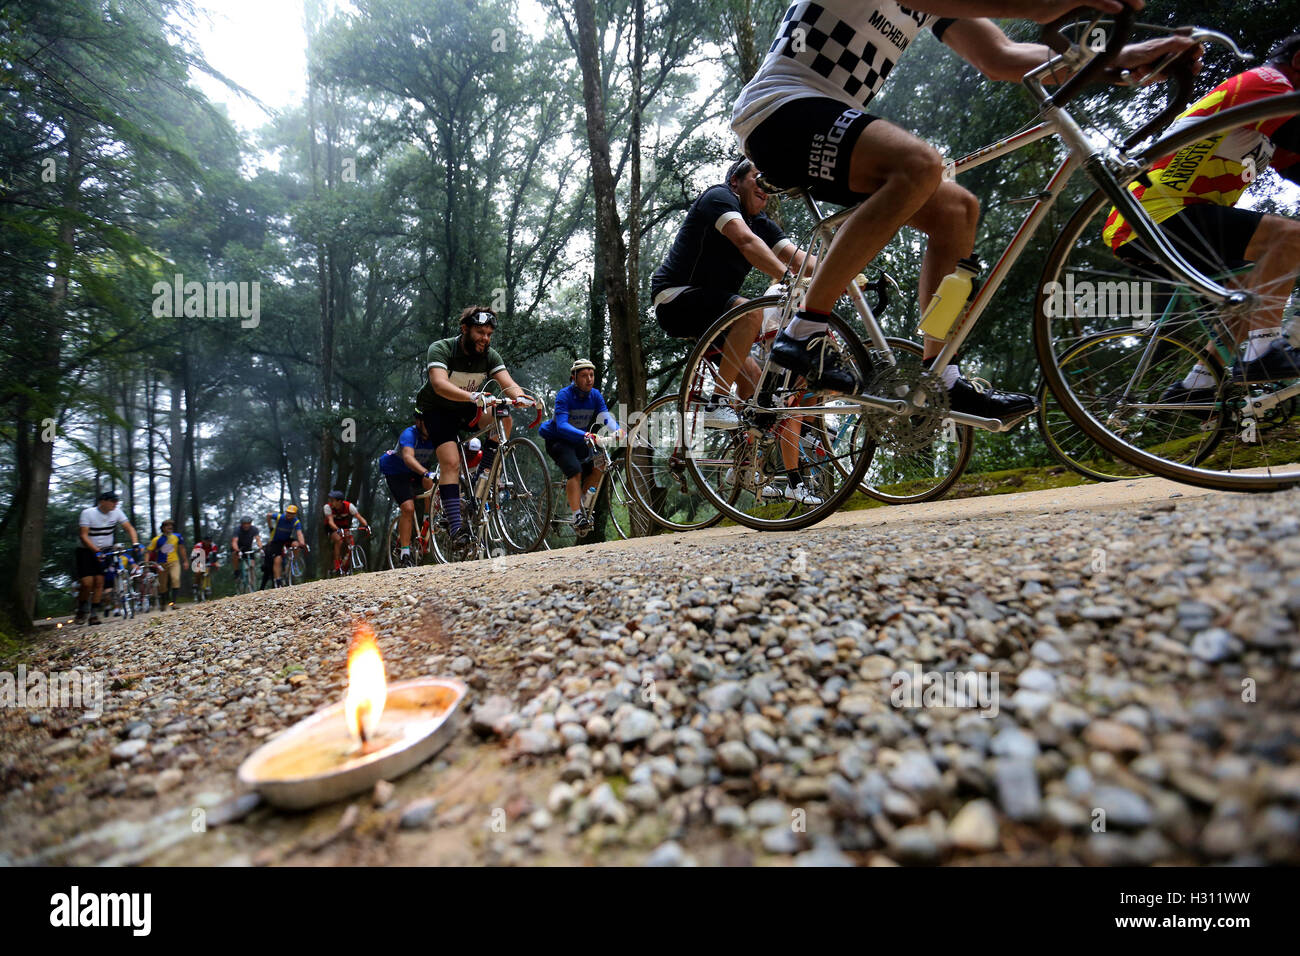 Tuscany, Italy. 2nd Oct, 2016. Cyclists ride past a forest where candles are lit to lighten the gravel road during the "Eroica" cycling event for old bikes in the Chianti area of Tuscany, Italy, on Oct. 2, 2016. More than 6,000 cyclists from 65 countries and regions, wearing vintage cycling jerseys, riding vintage bicycles built in 1987 or earlier, took part in the "Eroica" (heroic) cycling event through the Strade Bianche, the gravel roads of the Chianti area of Tuscany. © Jin Yu/Xinhua/Alamy Live News Stock Photo